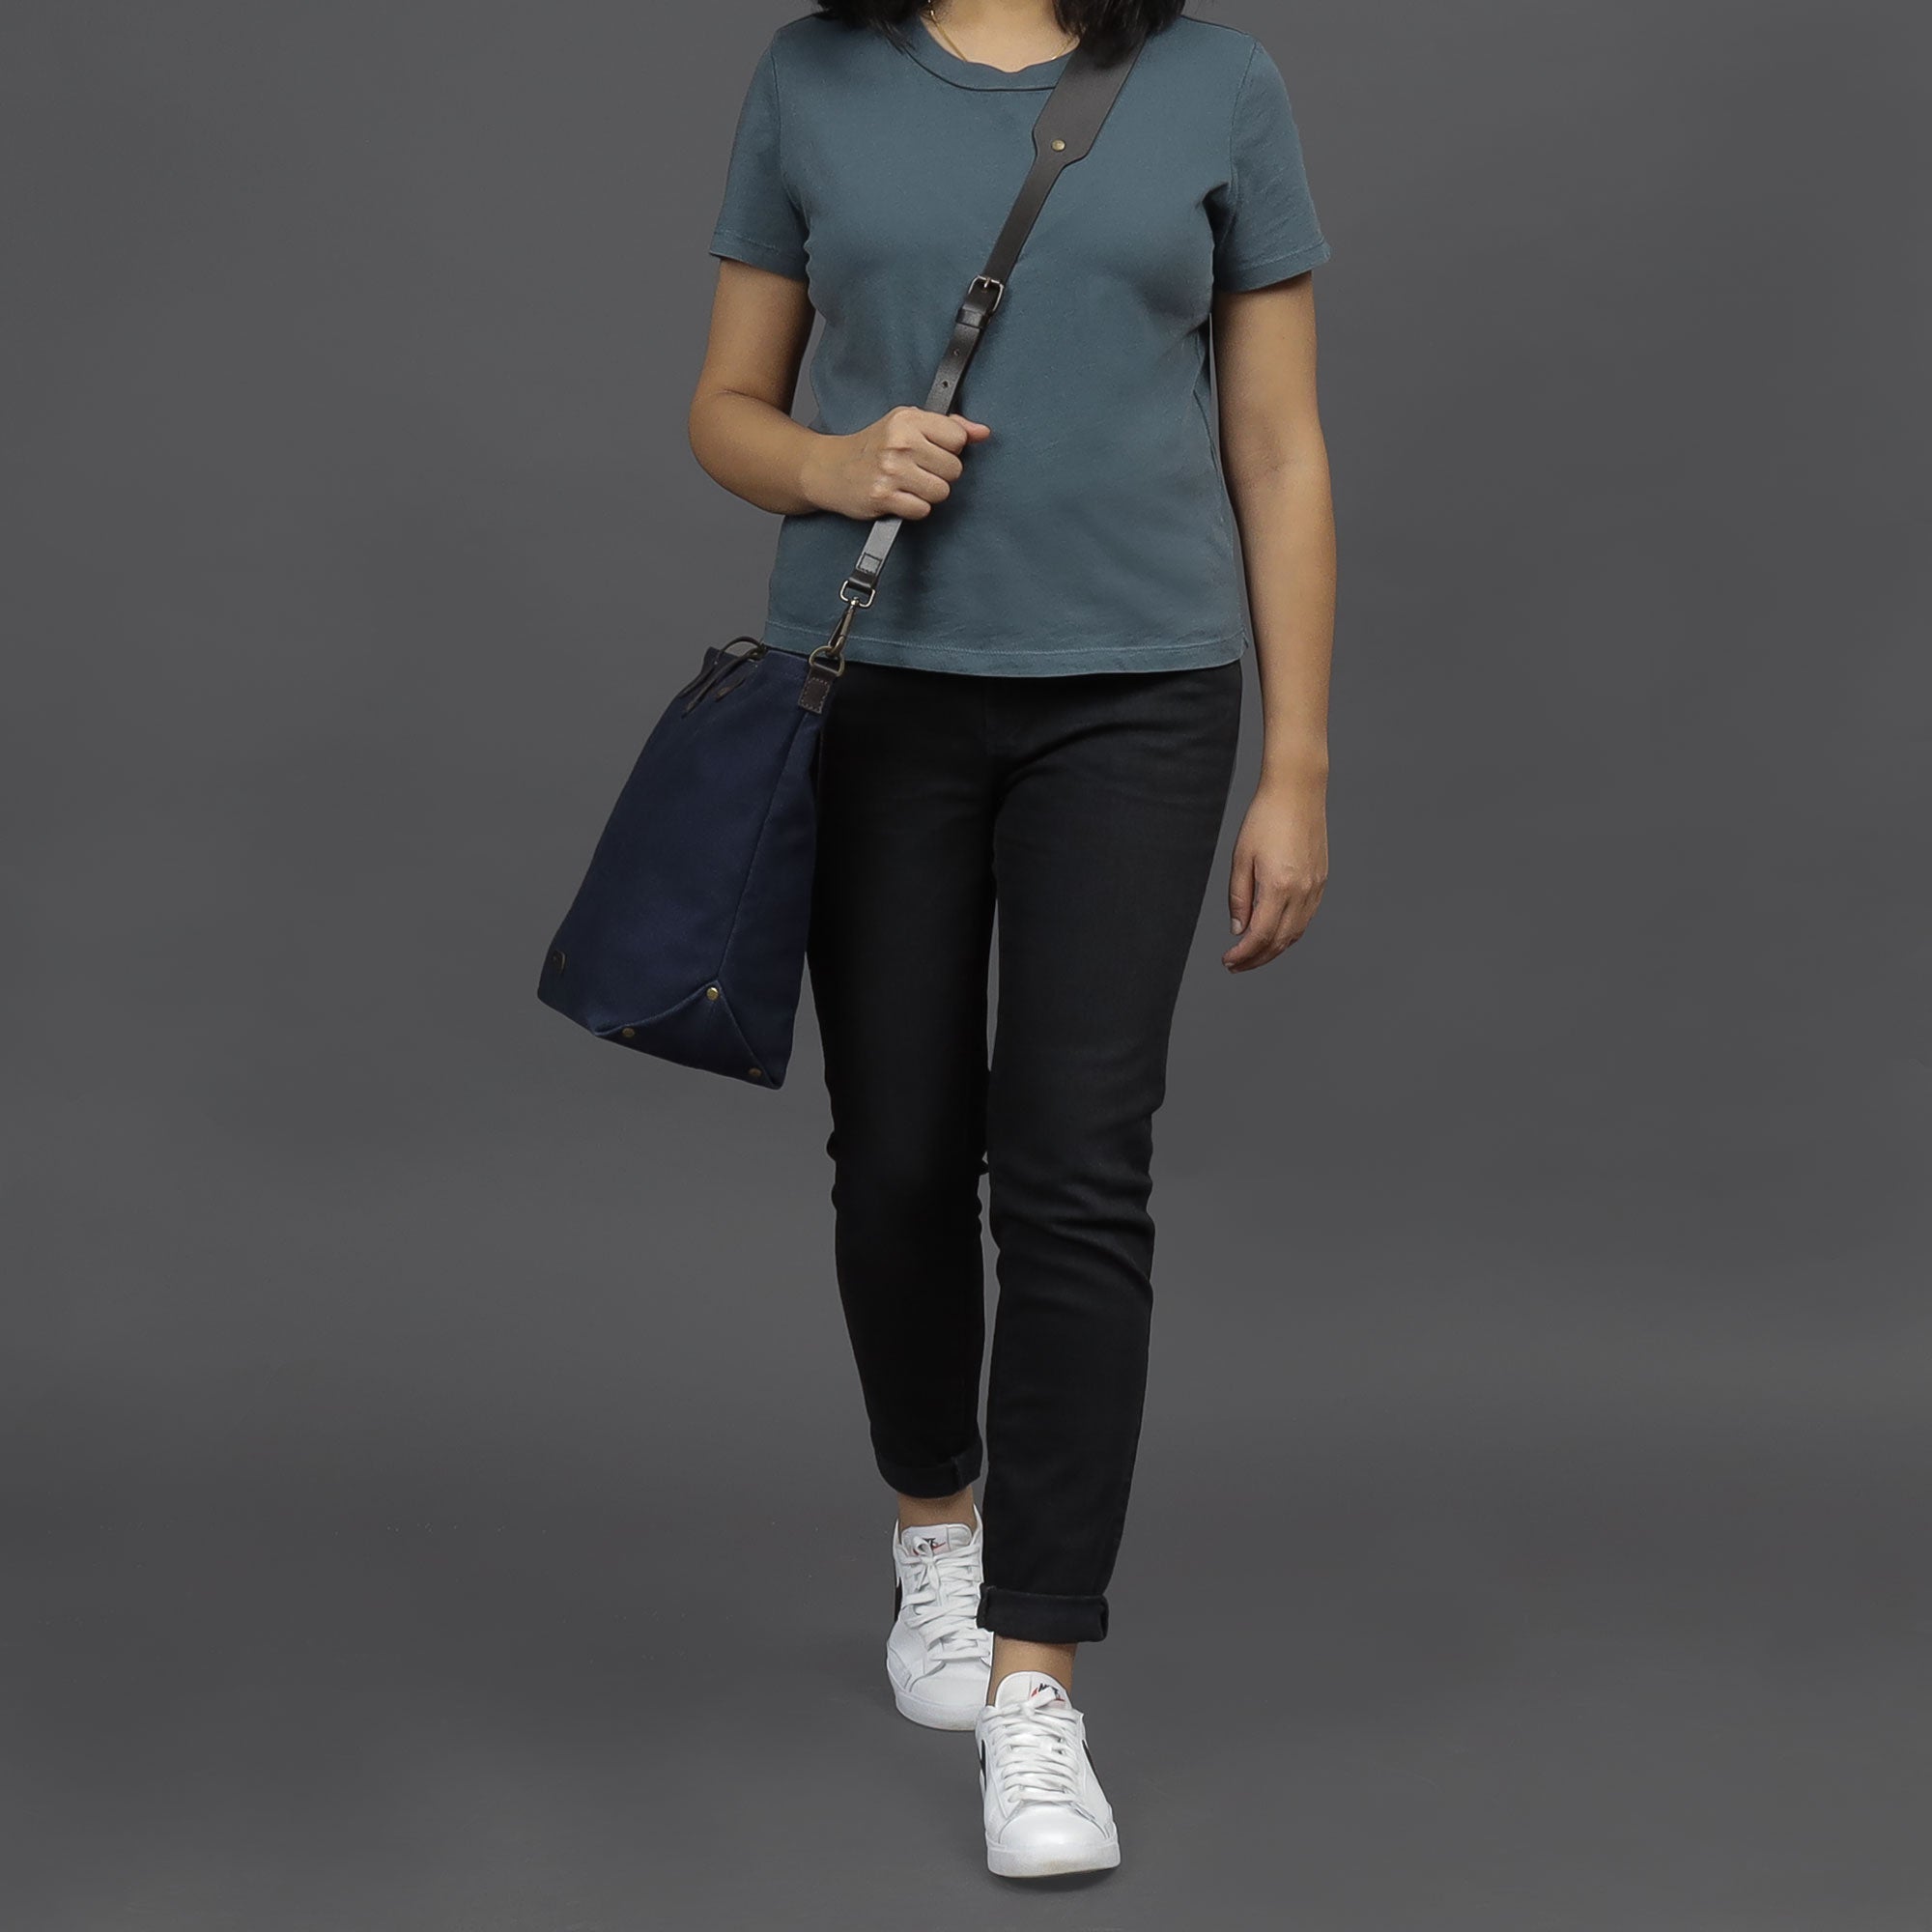 Navy canvas tote for working women